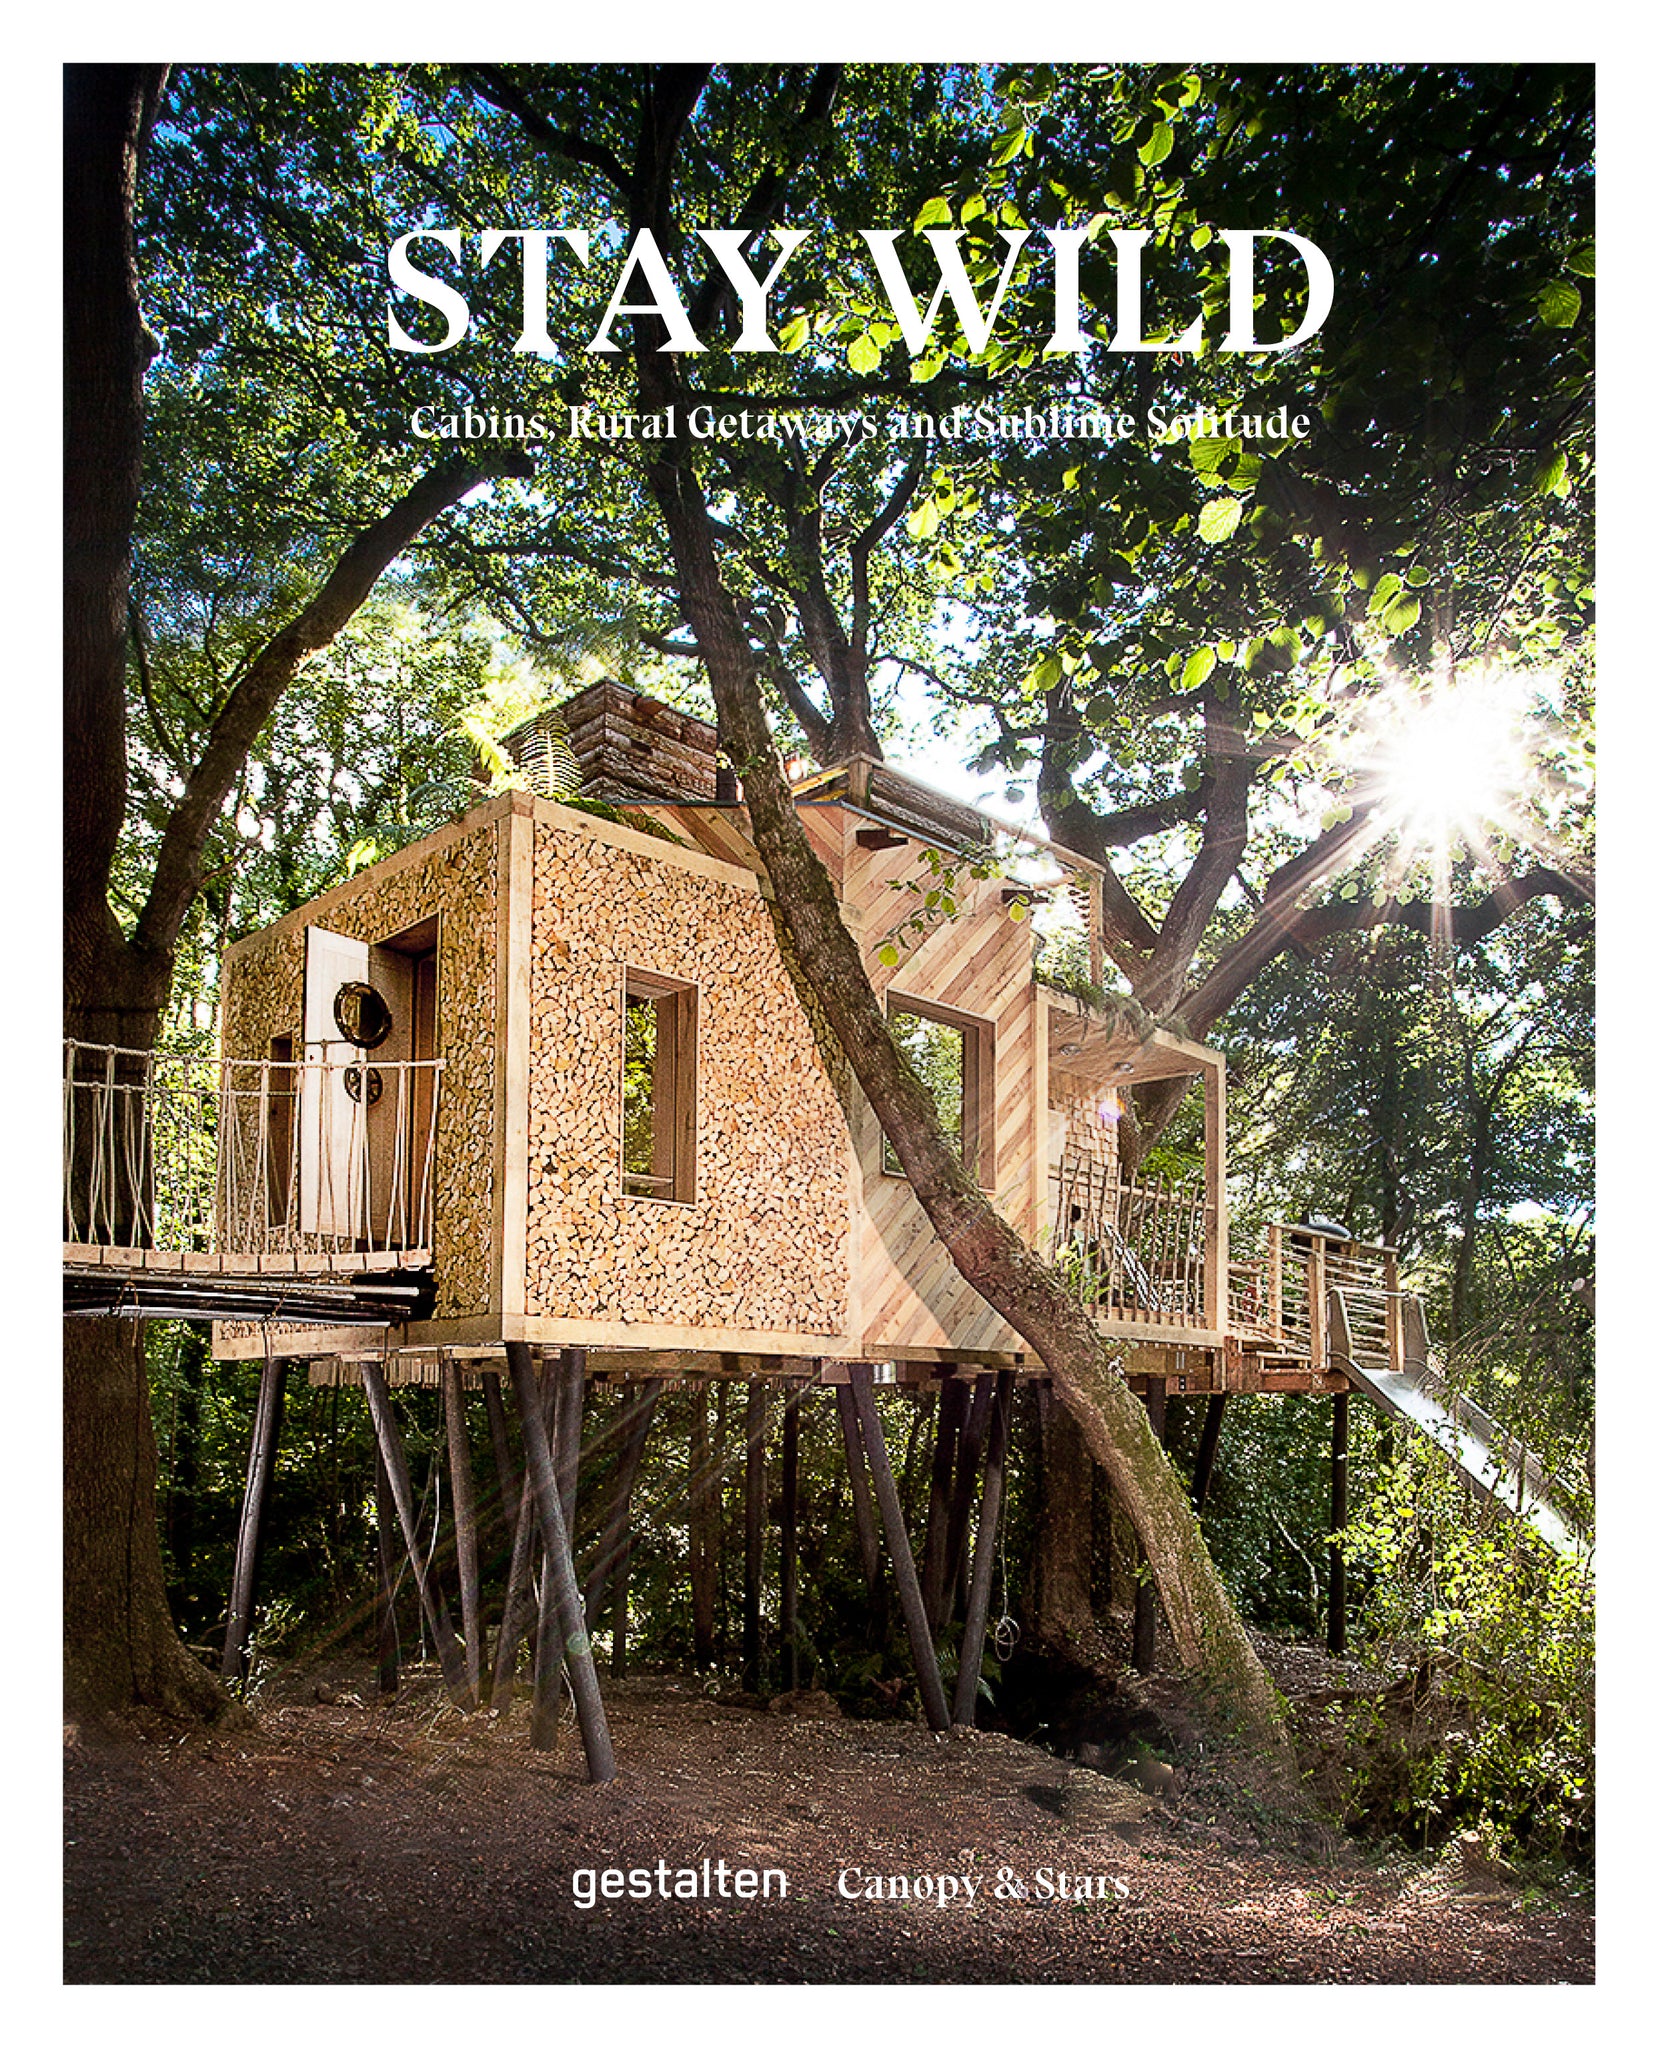 Stay Wild: Cabins, Rural Getaways and Sublime Solitude cover